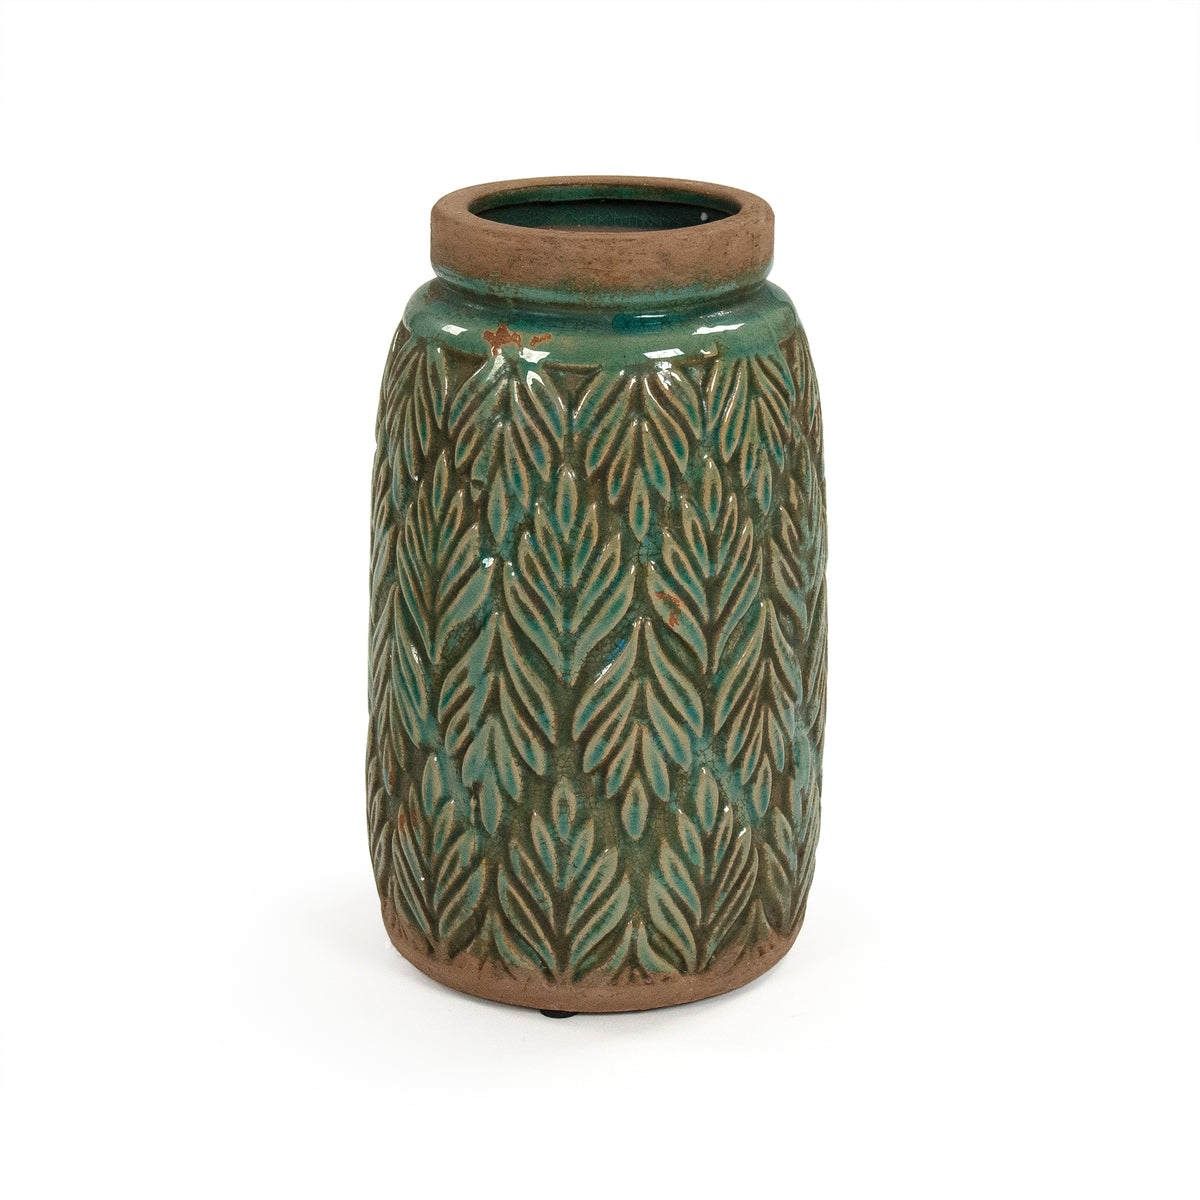 Distressed Green Pattern Vase Large by Zentique